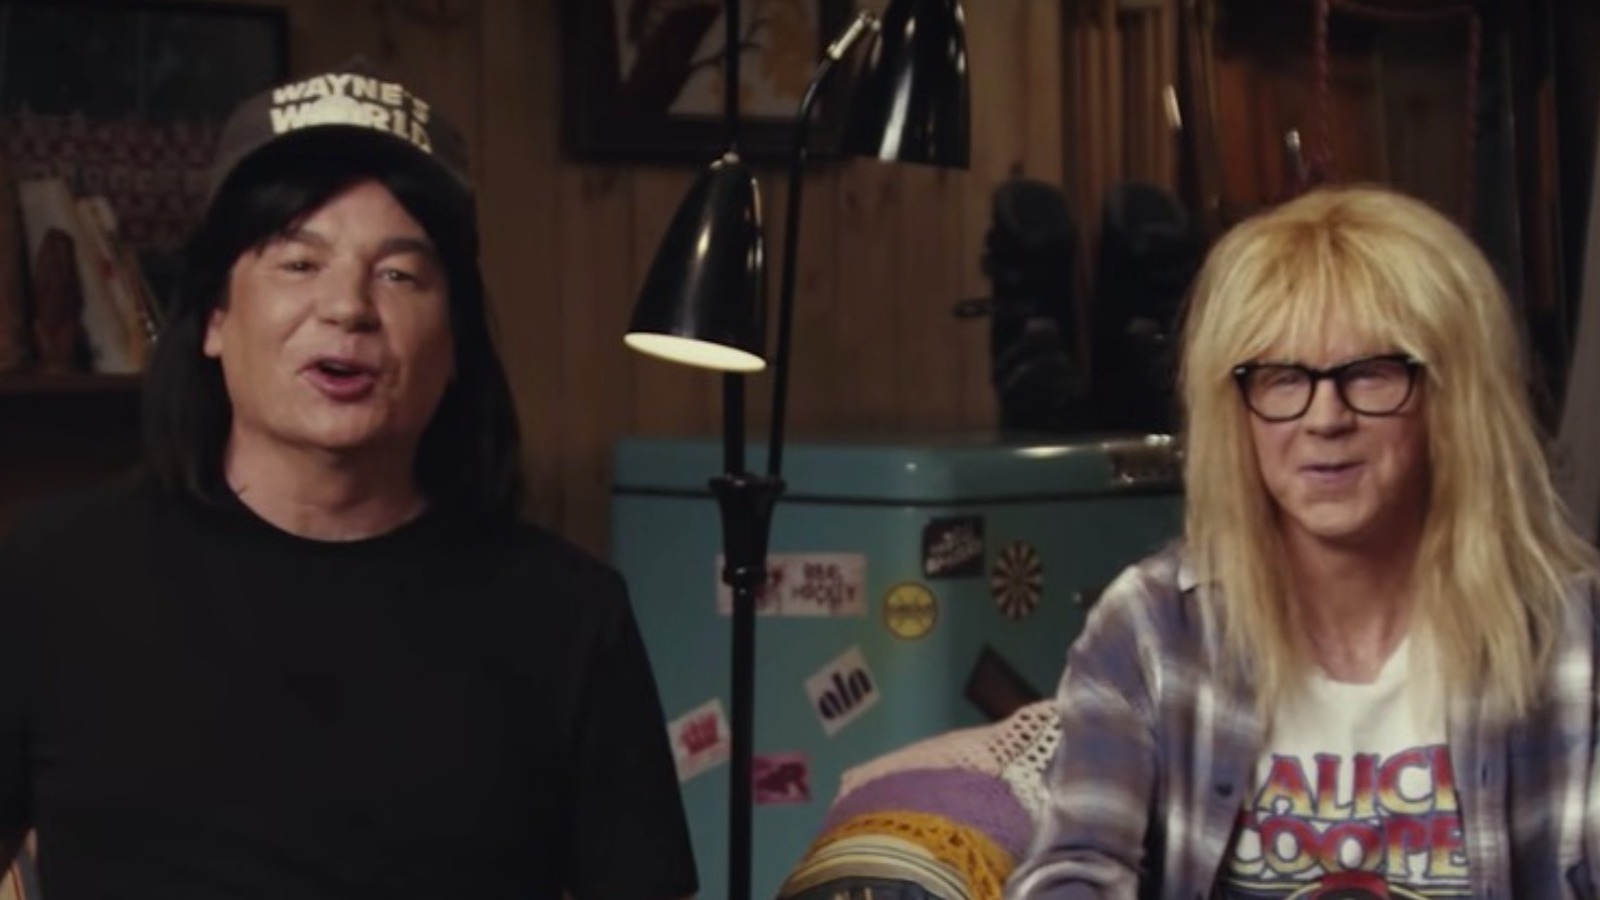 Uber Eats Wayne S World Commercial Had An Unexpected Guest Star